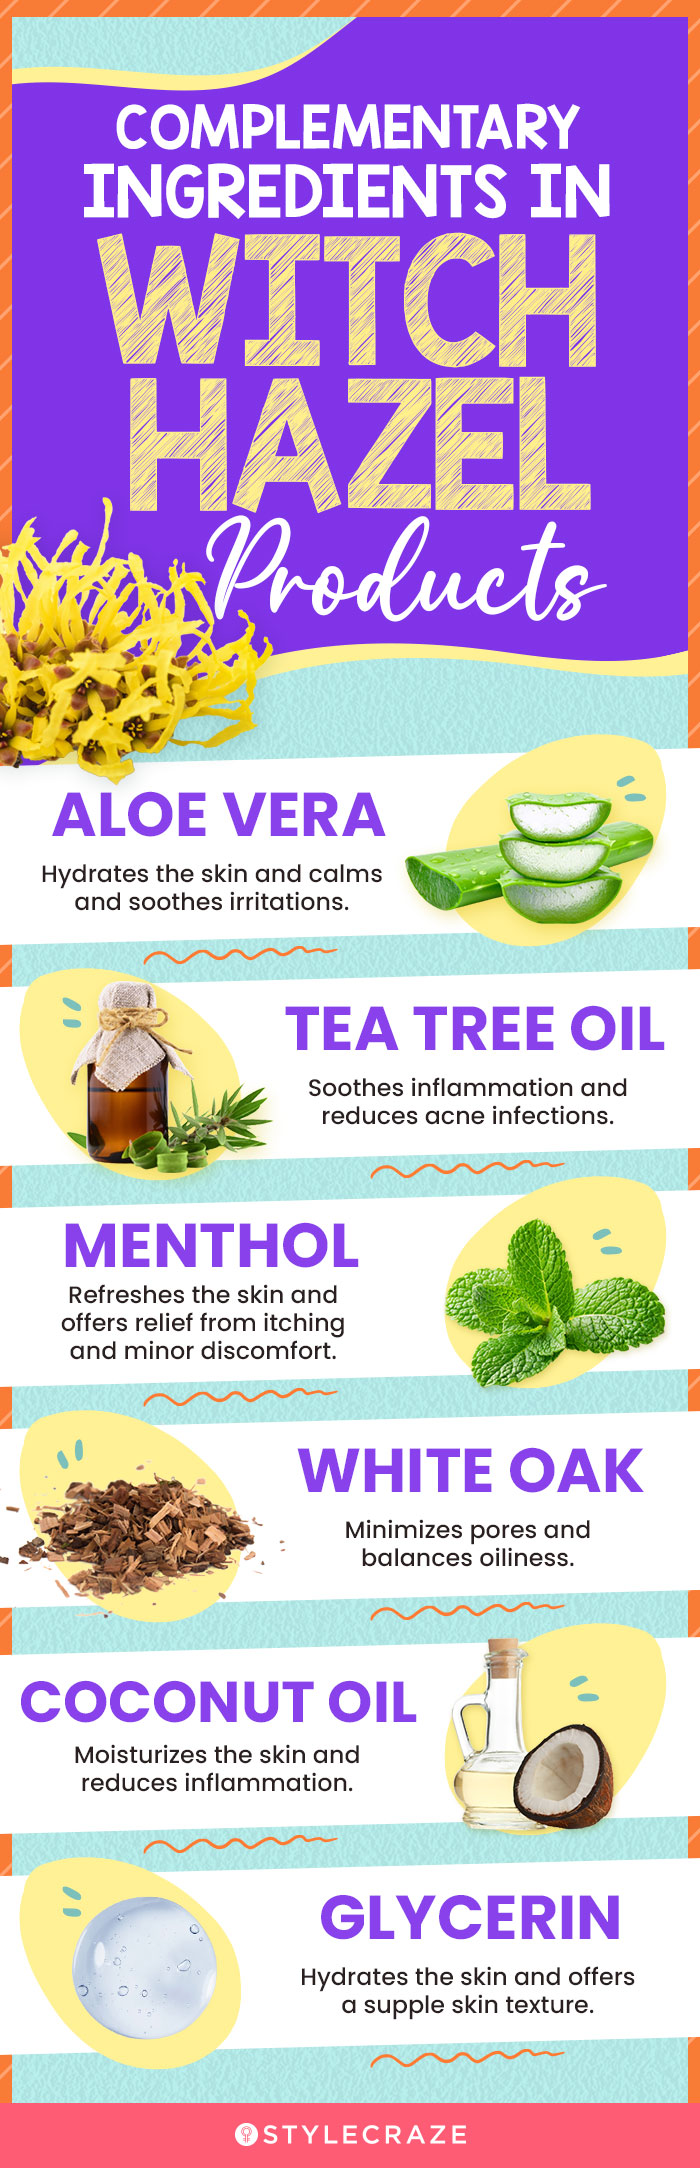 Complementary Ingredients In Witch Hazel Products (infographic)